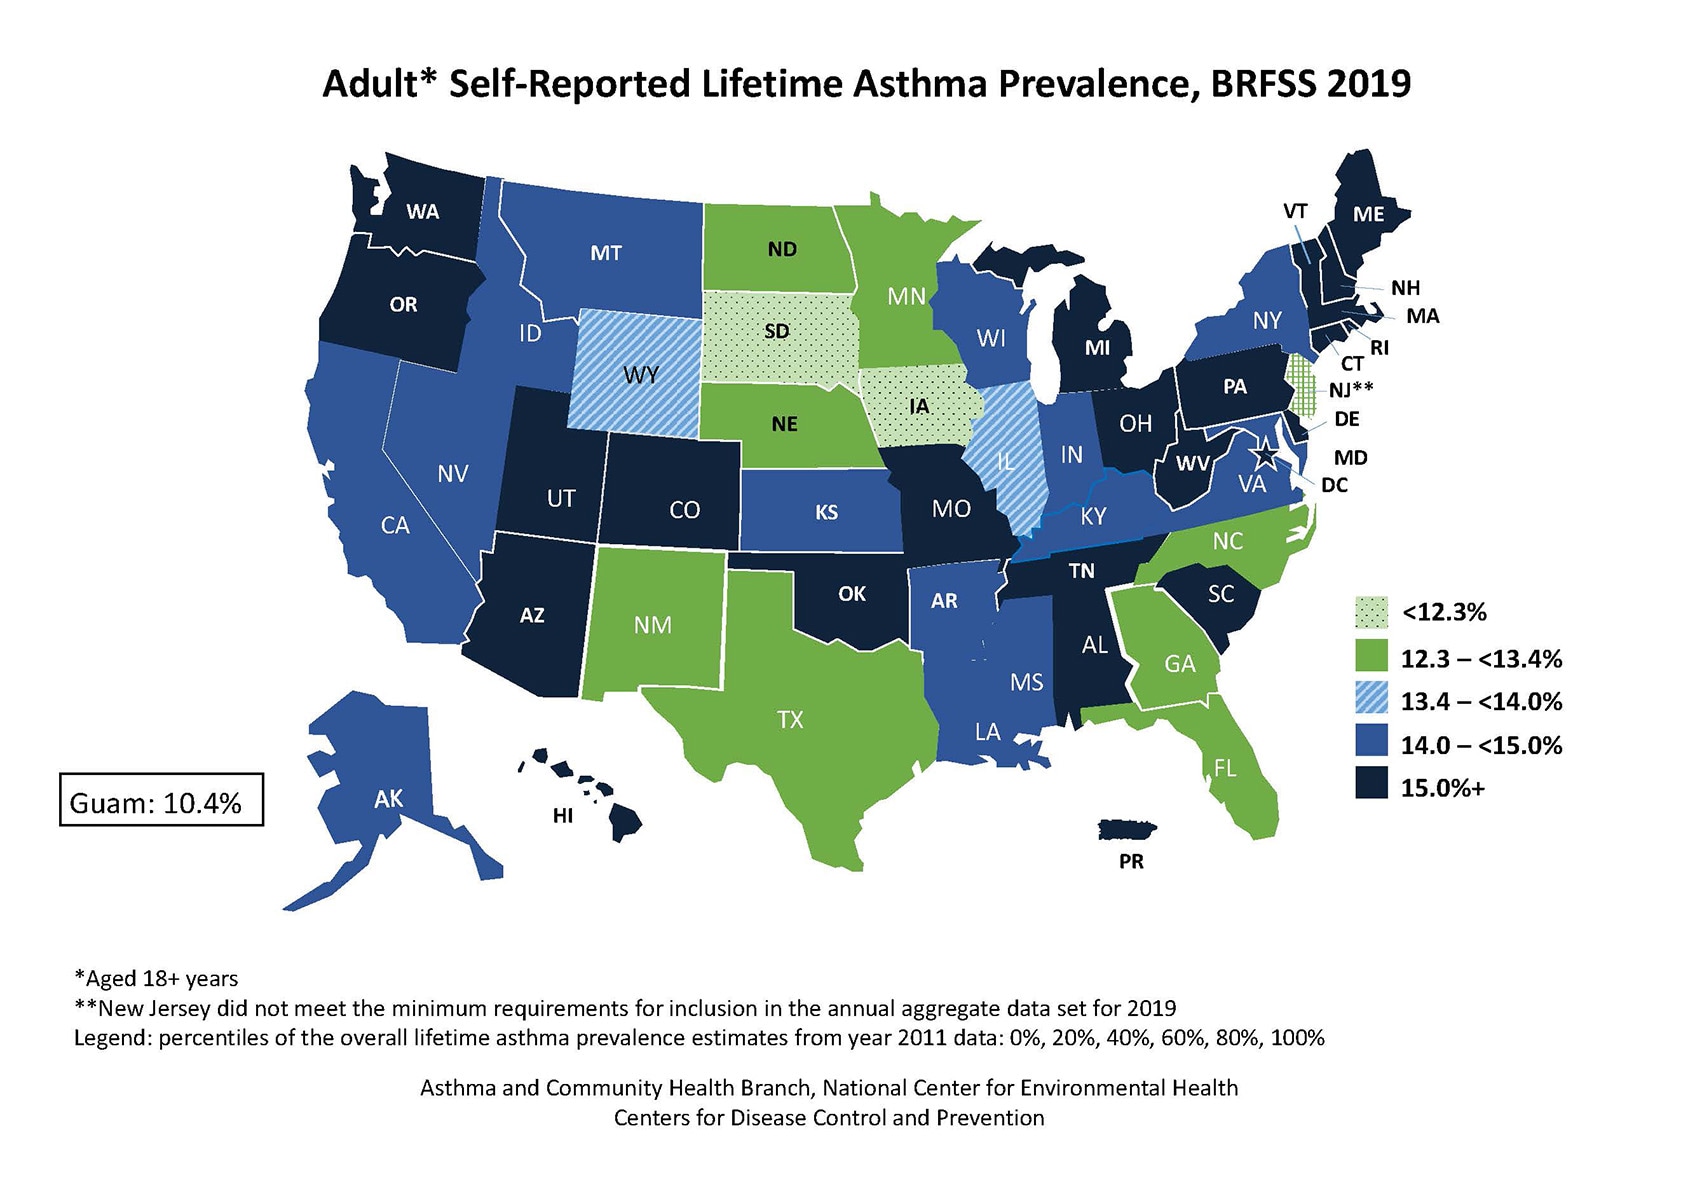 U.S. map showing adult self-reported lifetime asthma prevalence by state for BRFSS 2019